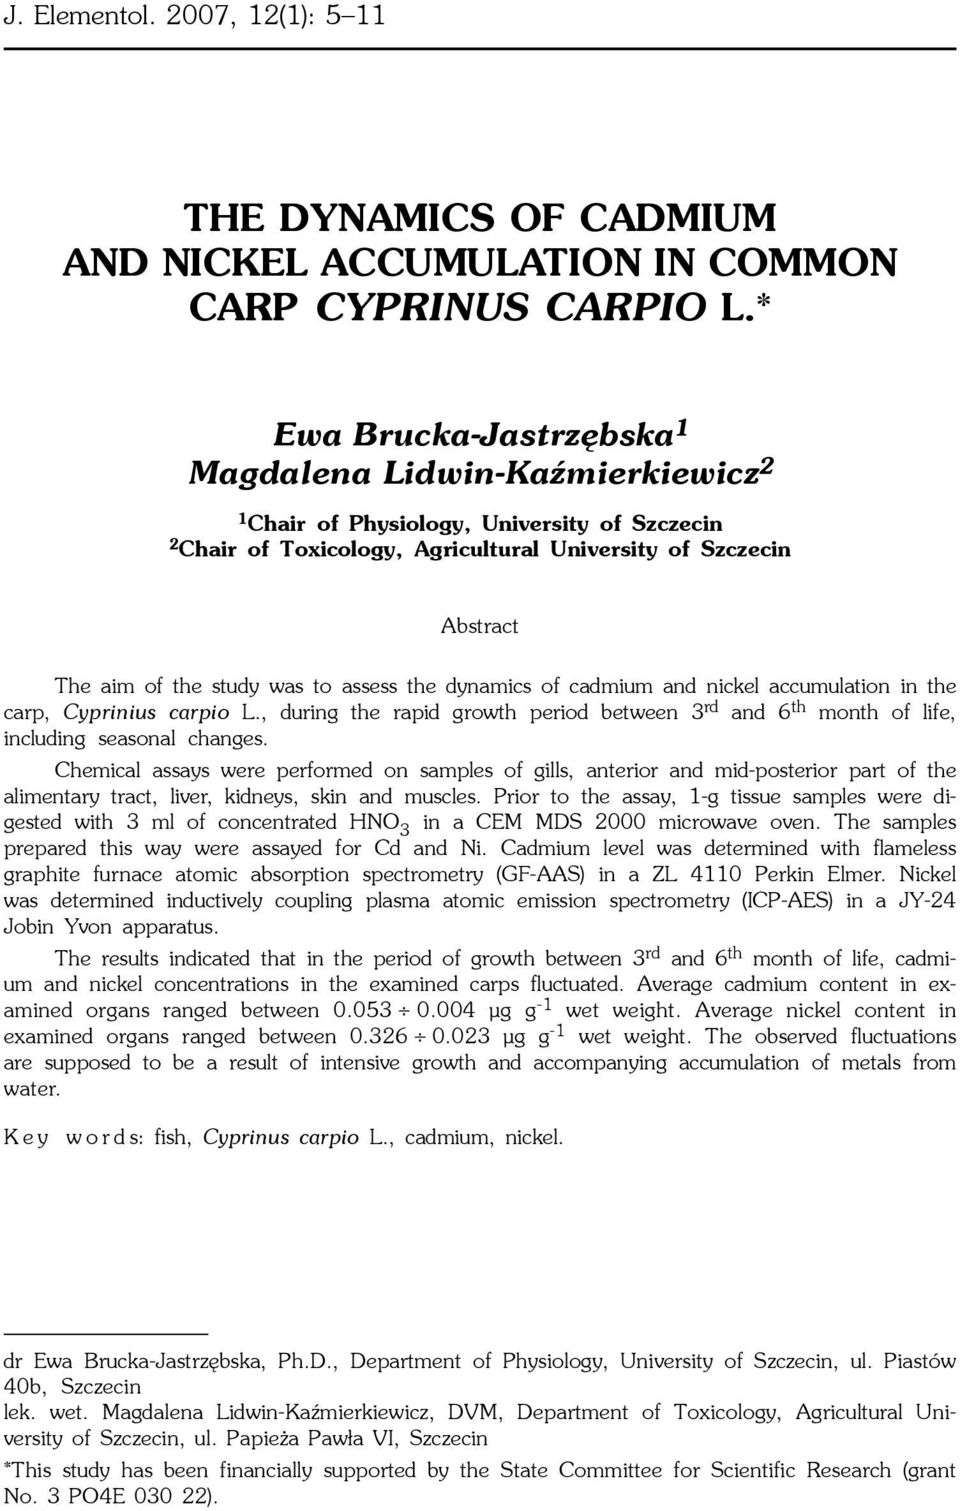 to assess the dynamics of cadmium and nickel accumulation in the carp, Cyprinius carpio L., during the rapid growth period between 3 rd and 6 th month of life, including seasonal changes.